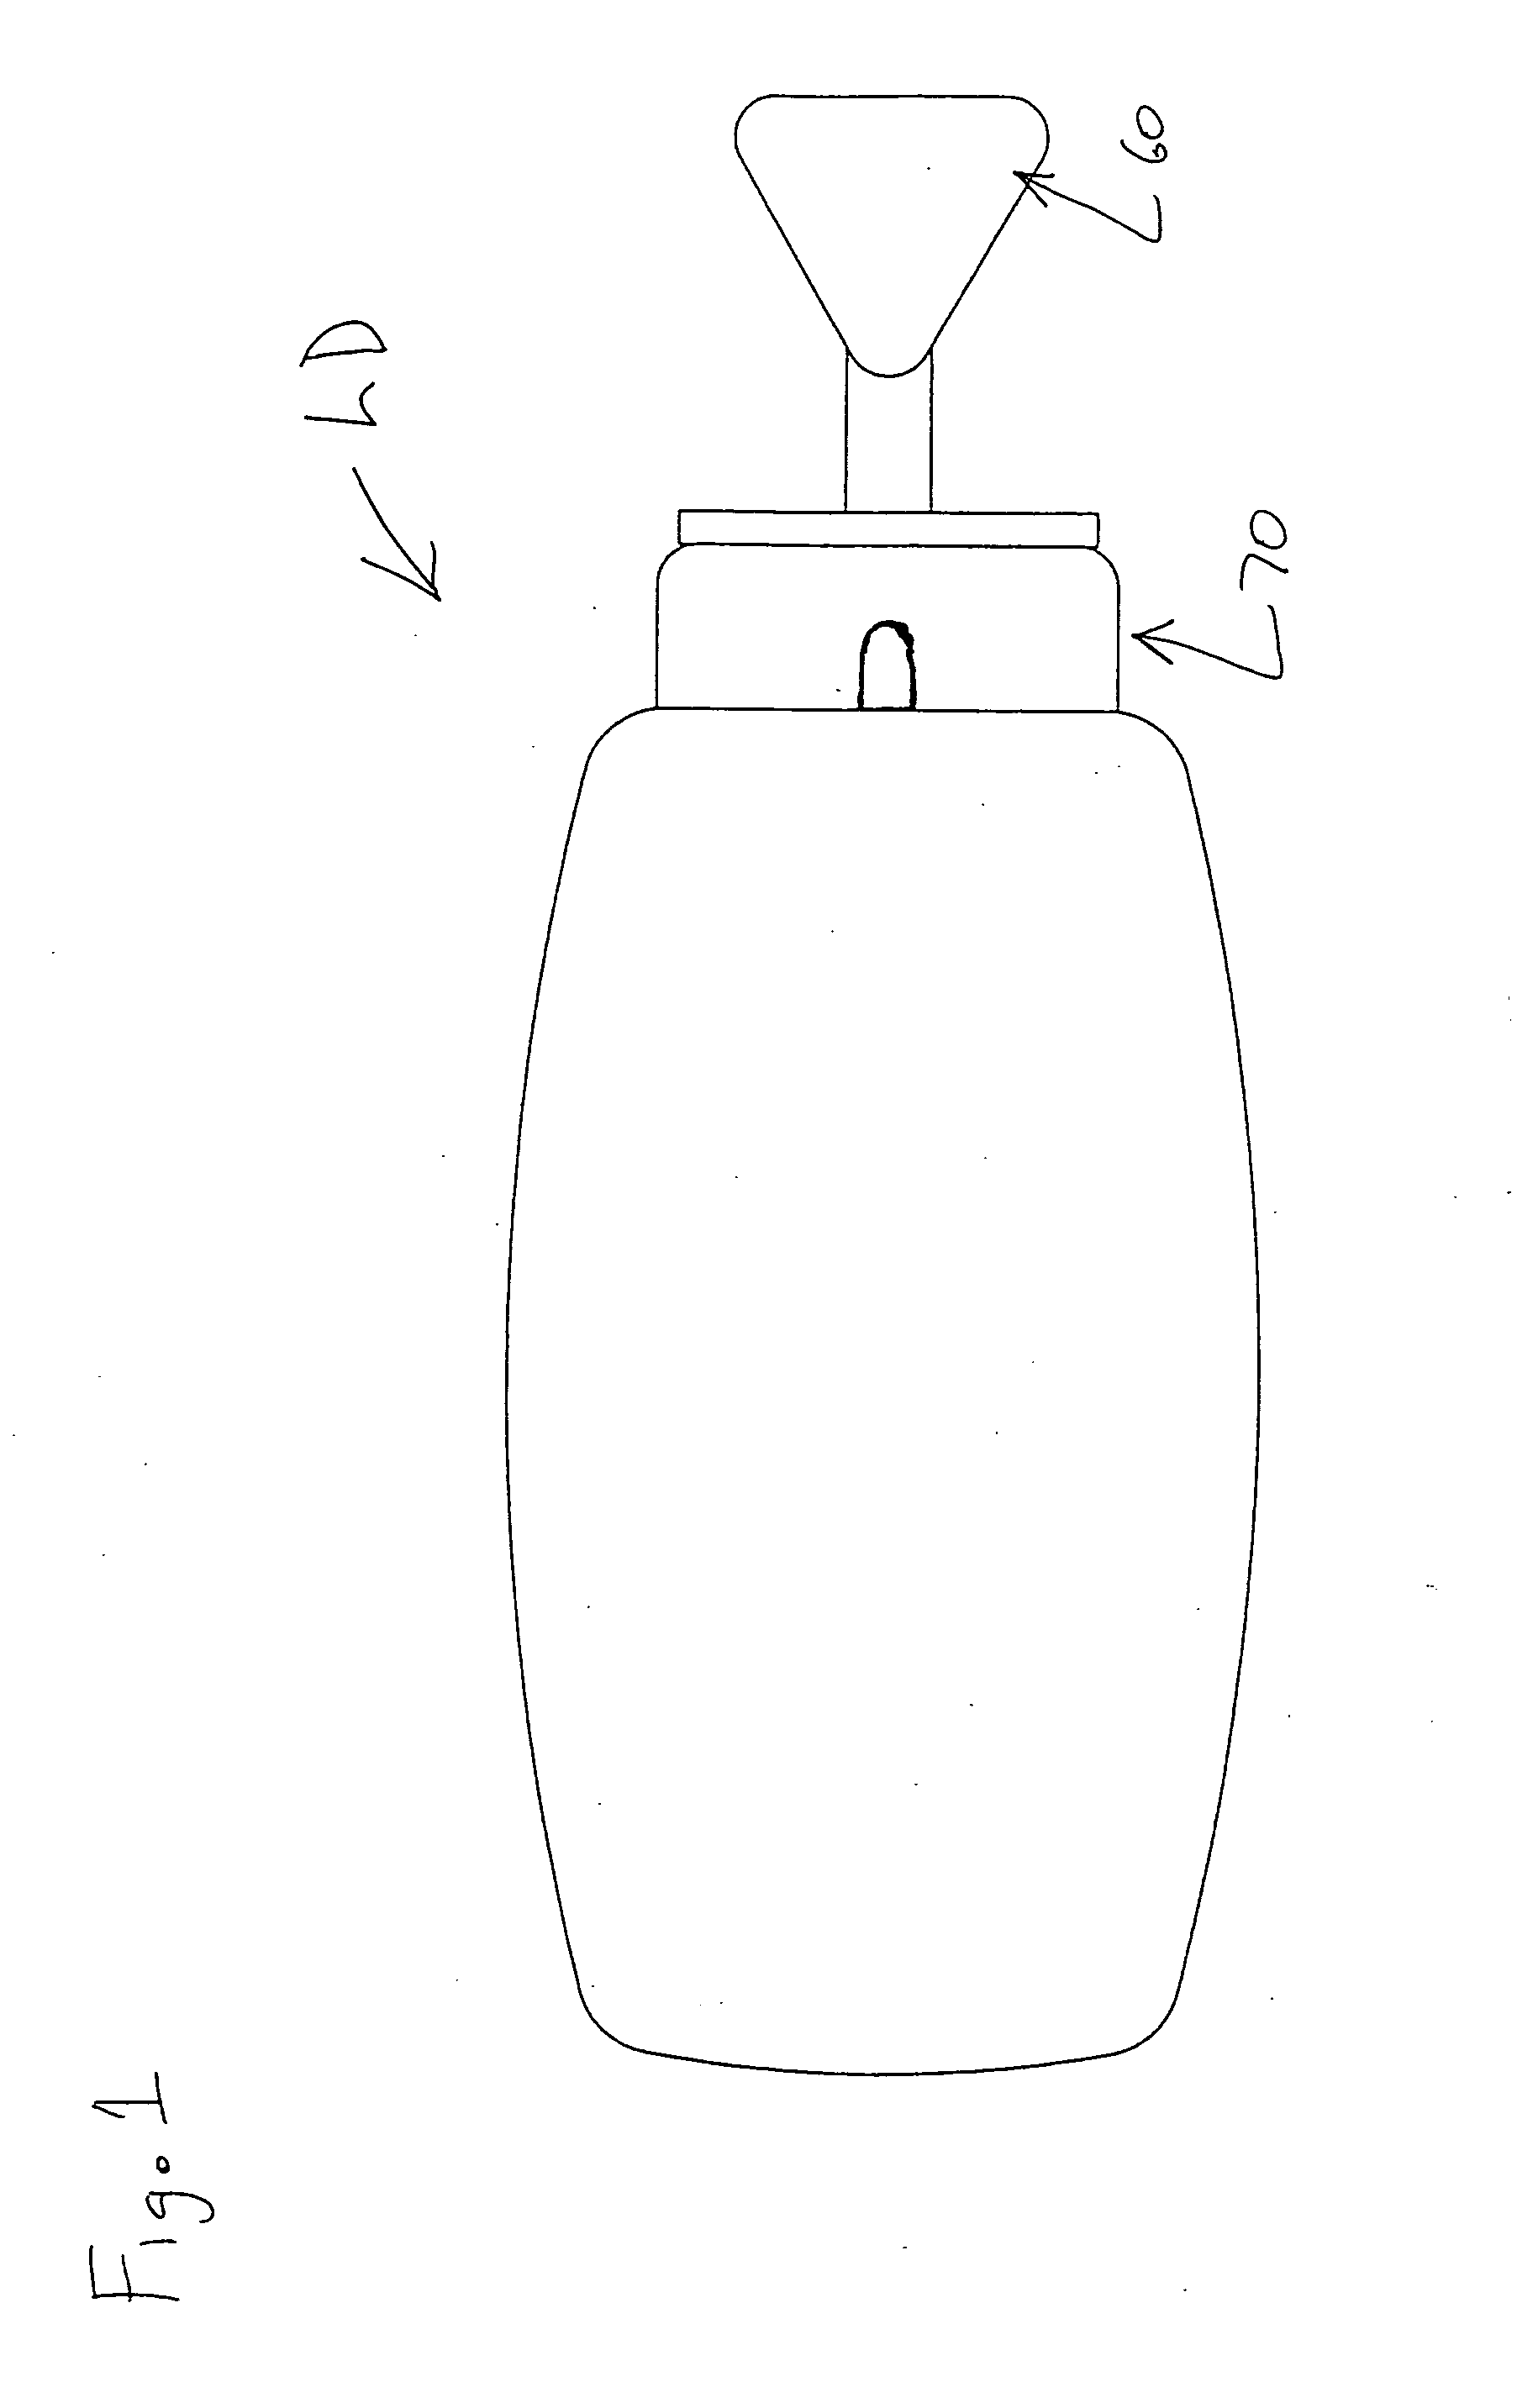 Disposable or single-use lancet device and method